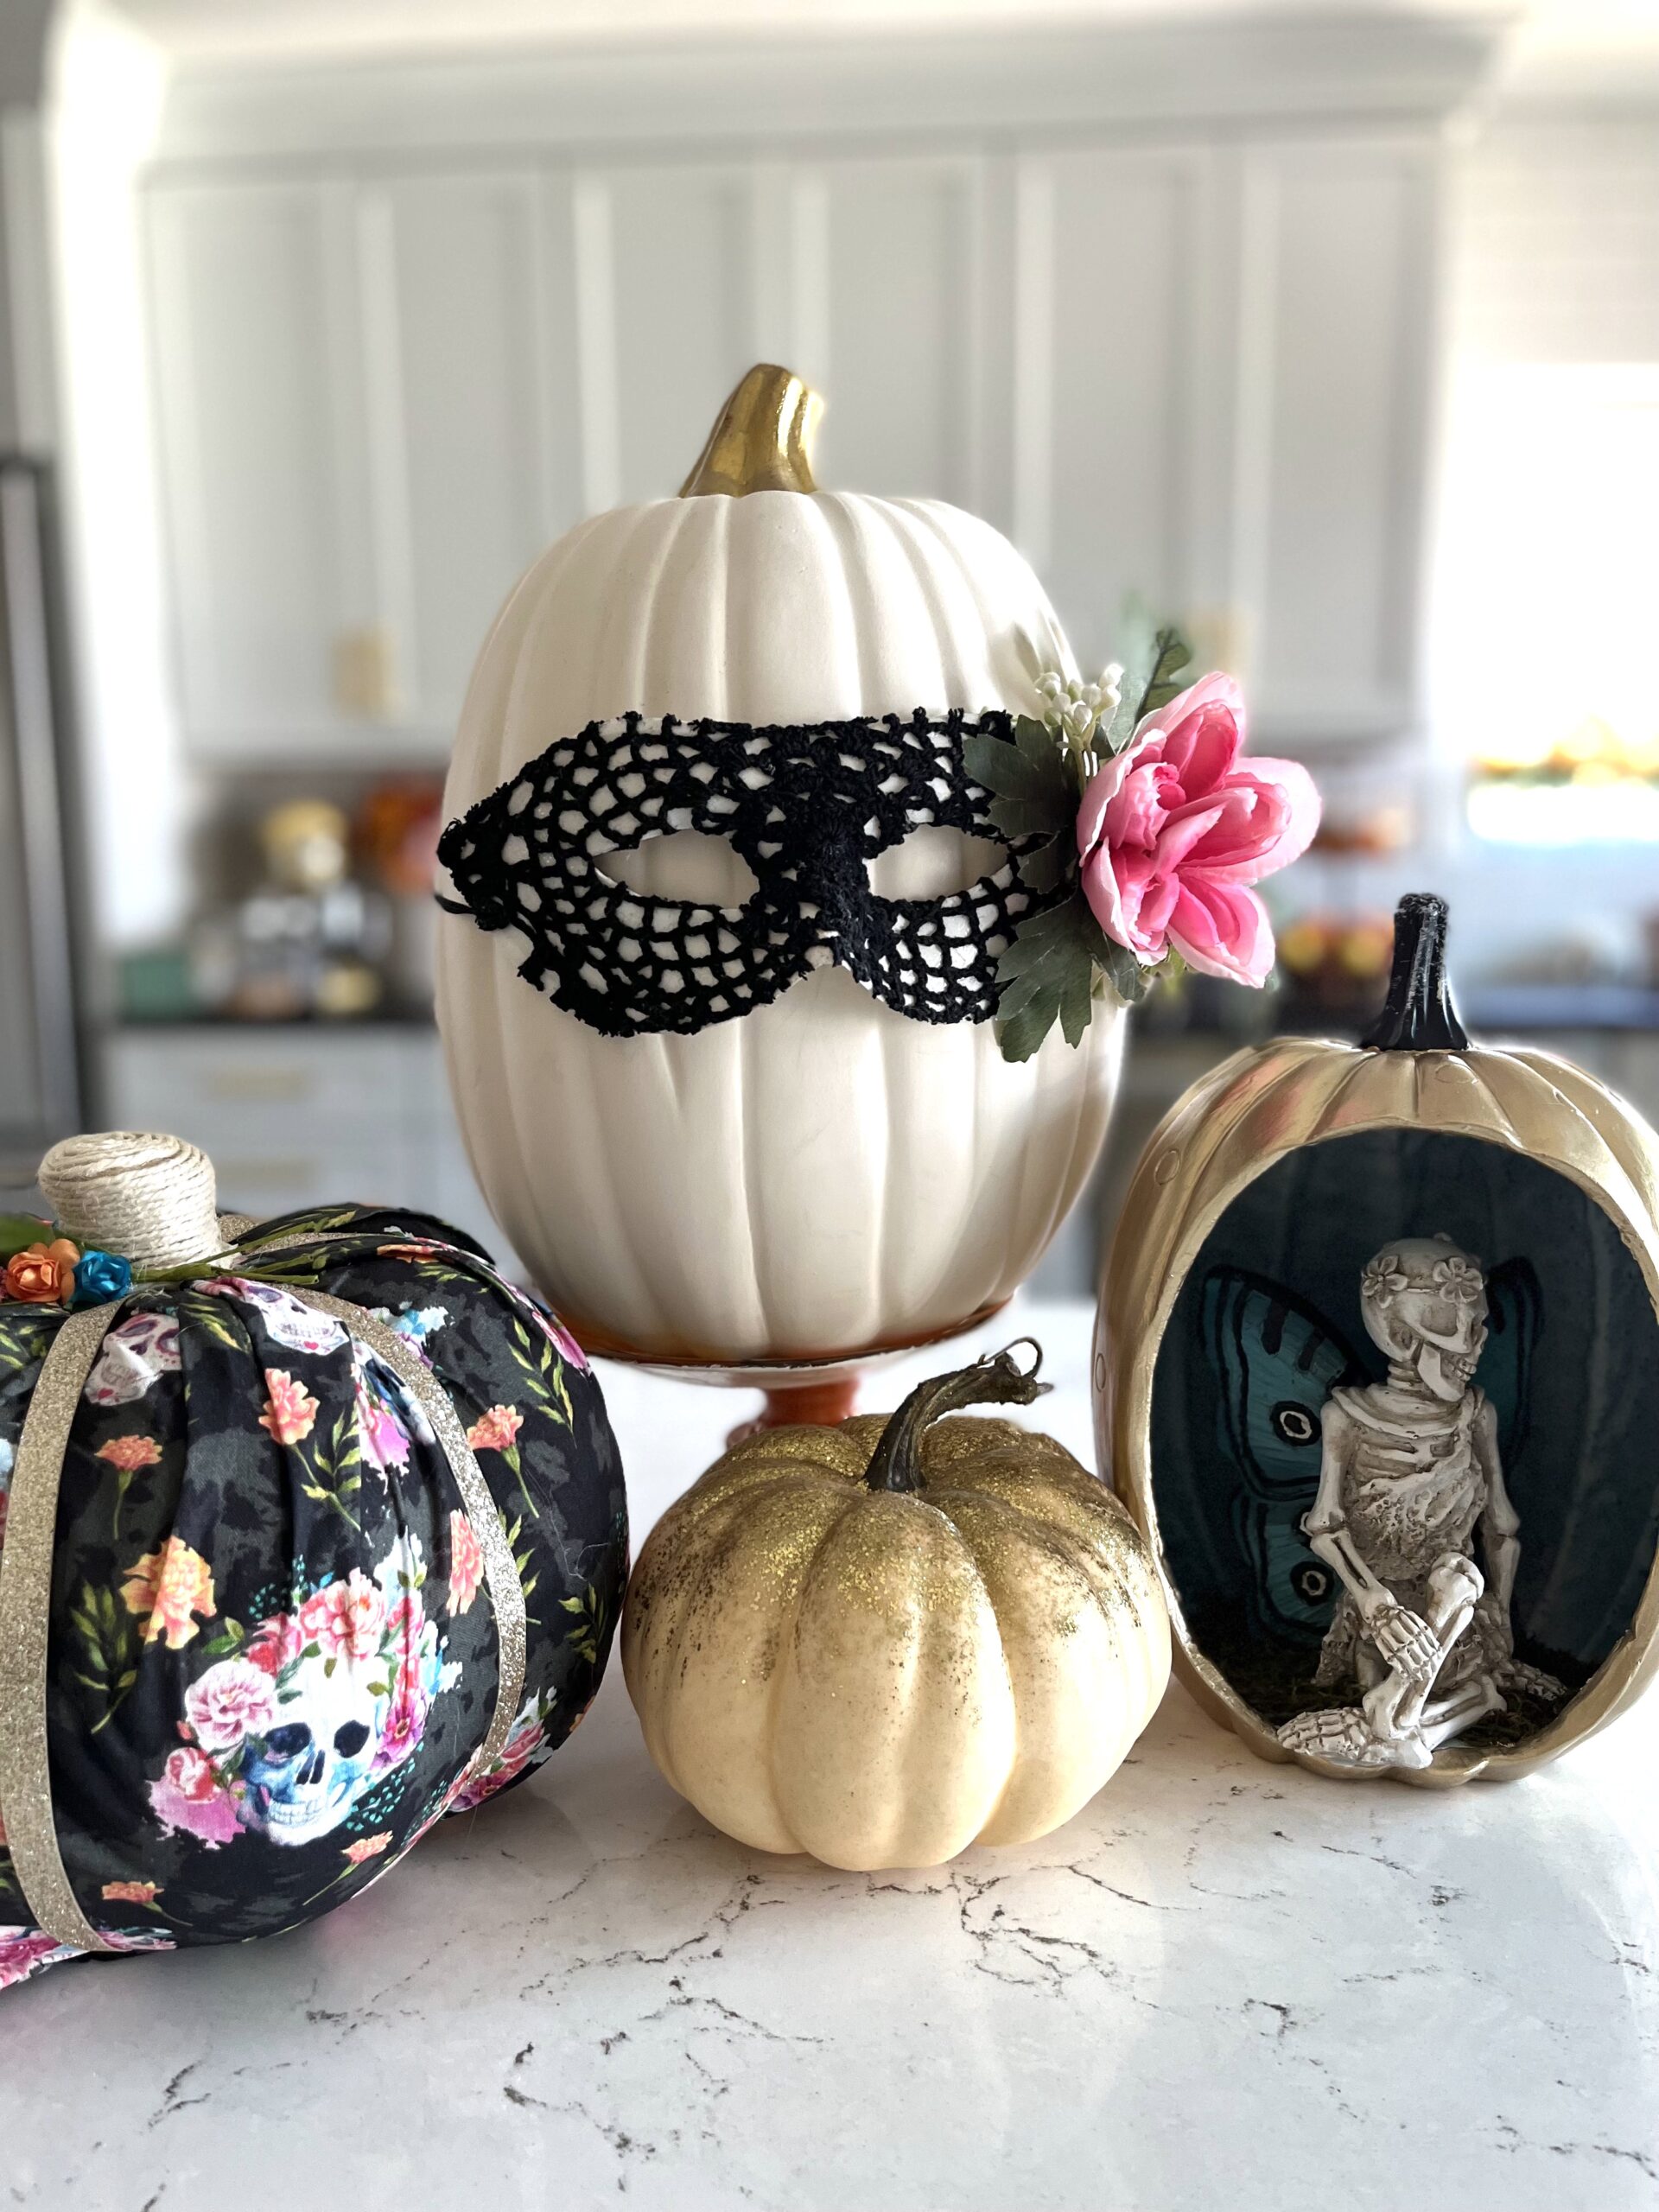 How to Cover Pumpkins with Fabric + Decorating Tips - CATHIE FILIAN's  Handmade Happy Hour